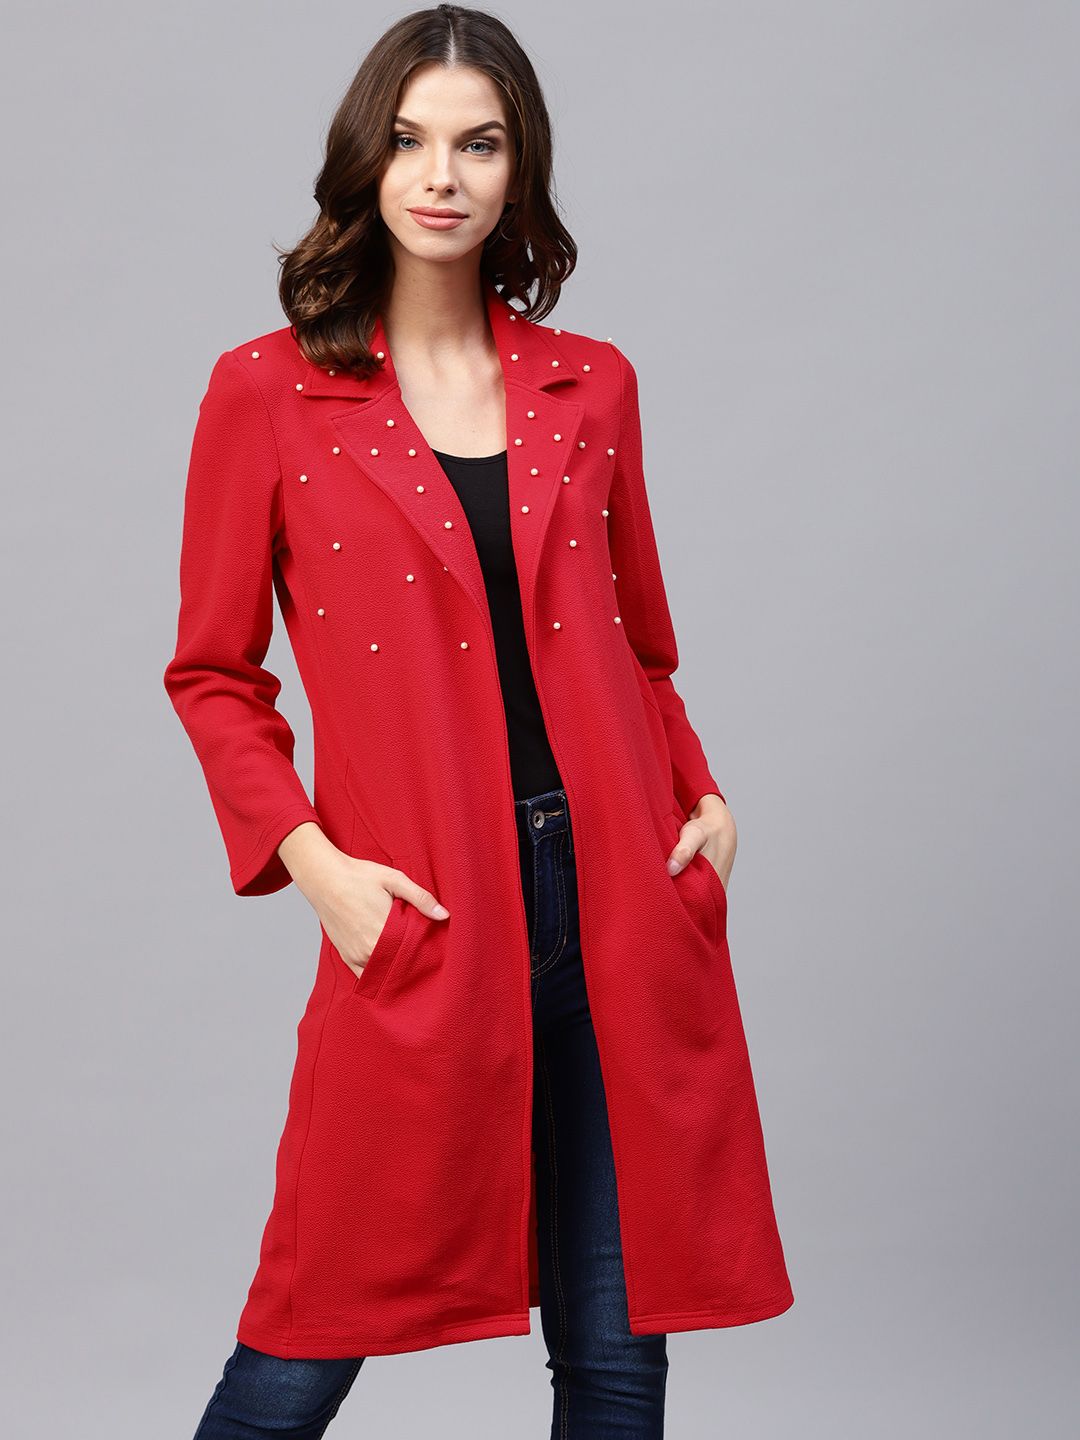 Athena Red Solid Longline Open Front Shrug Price in India